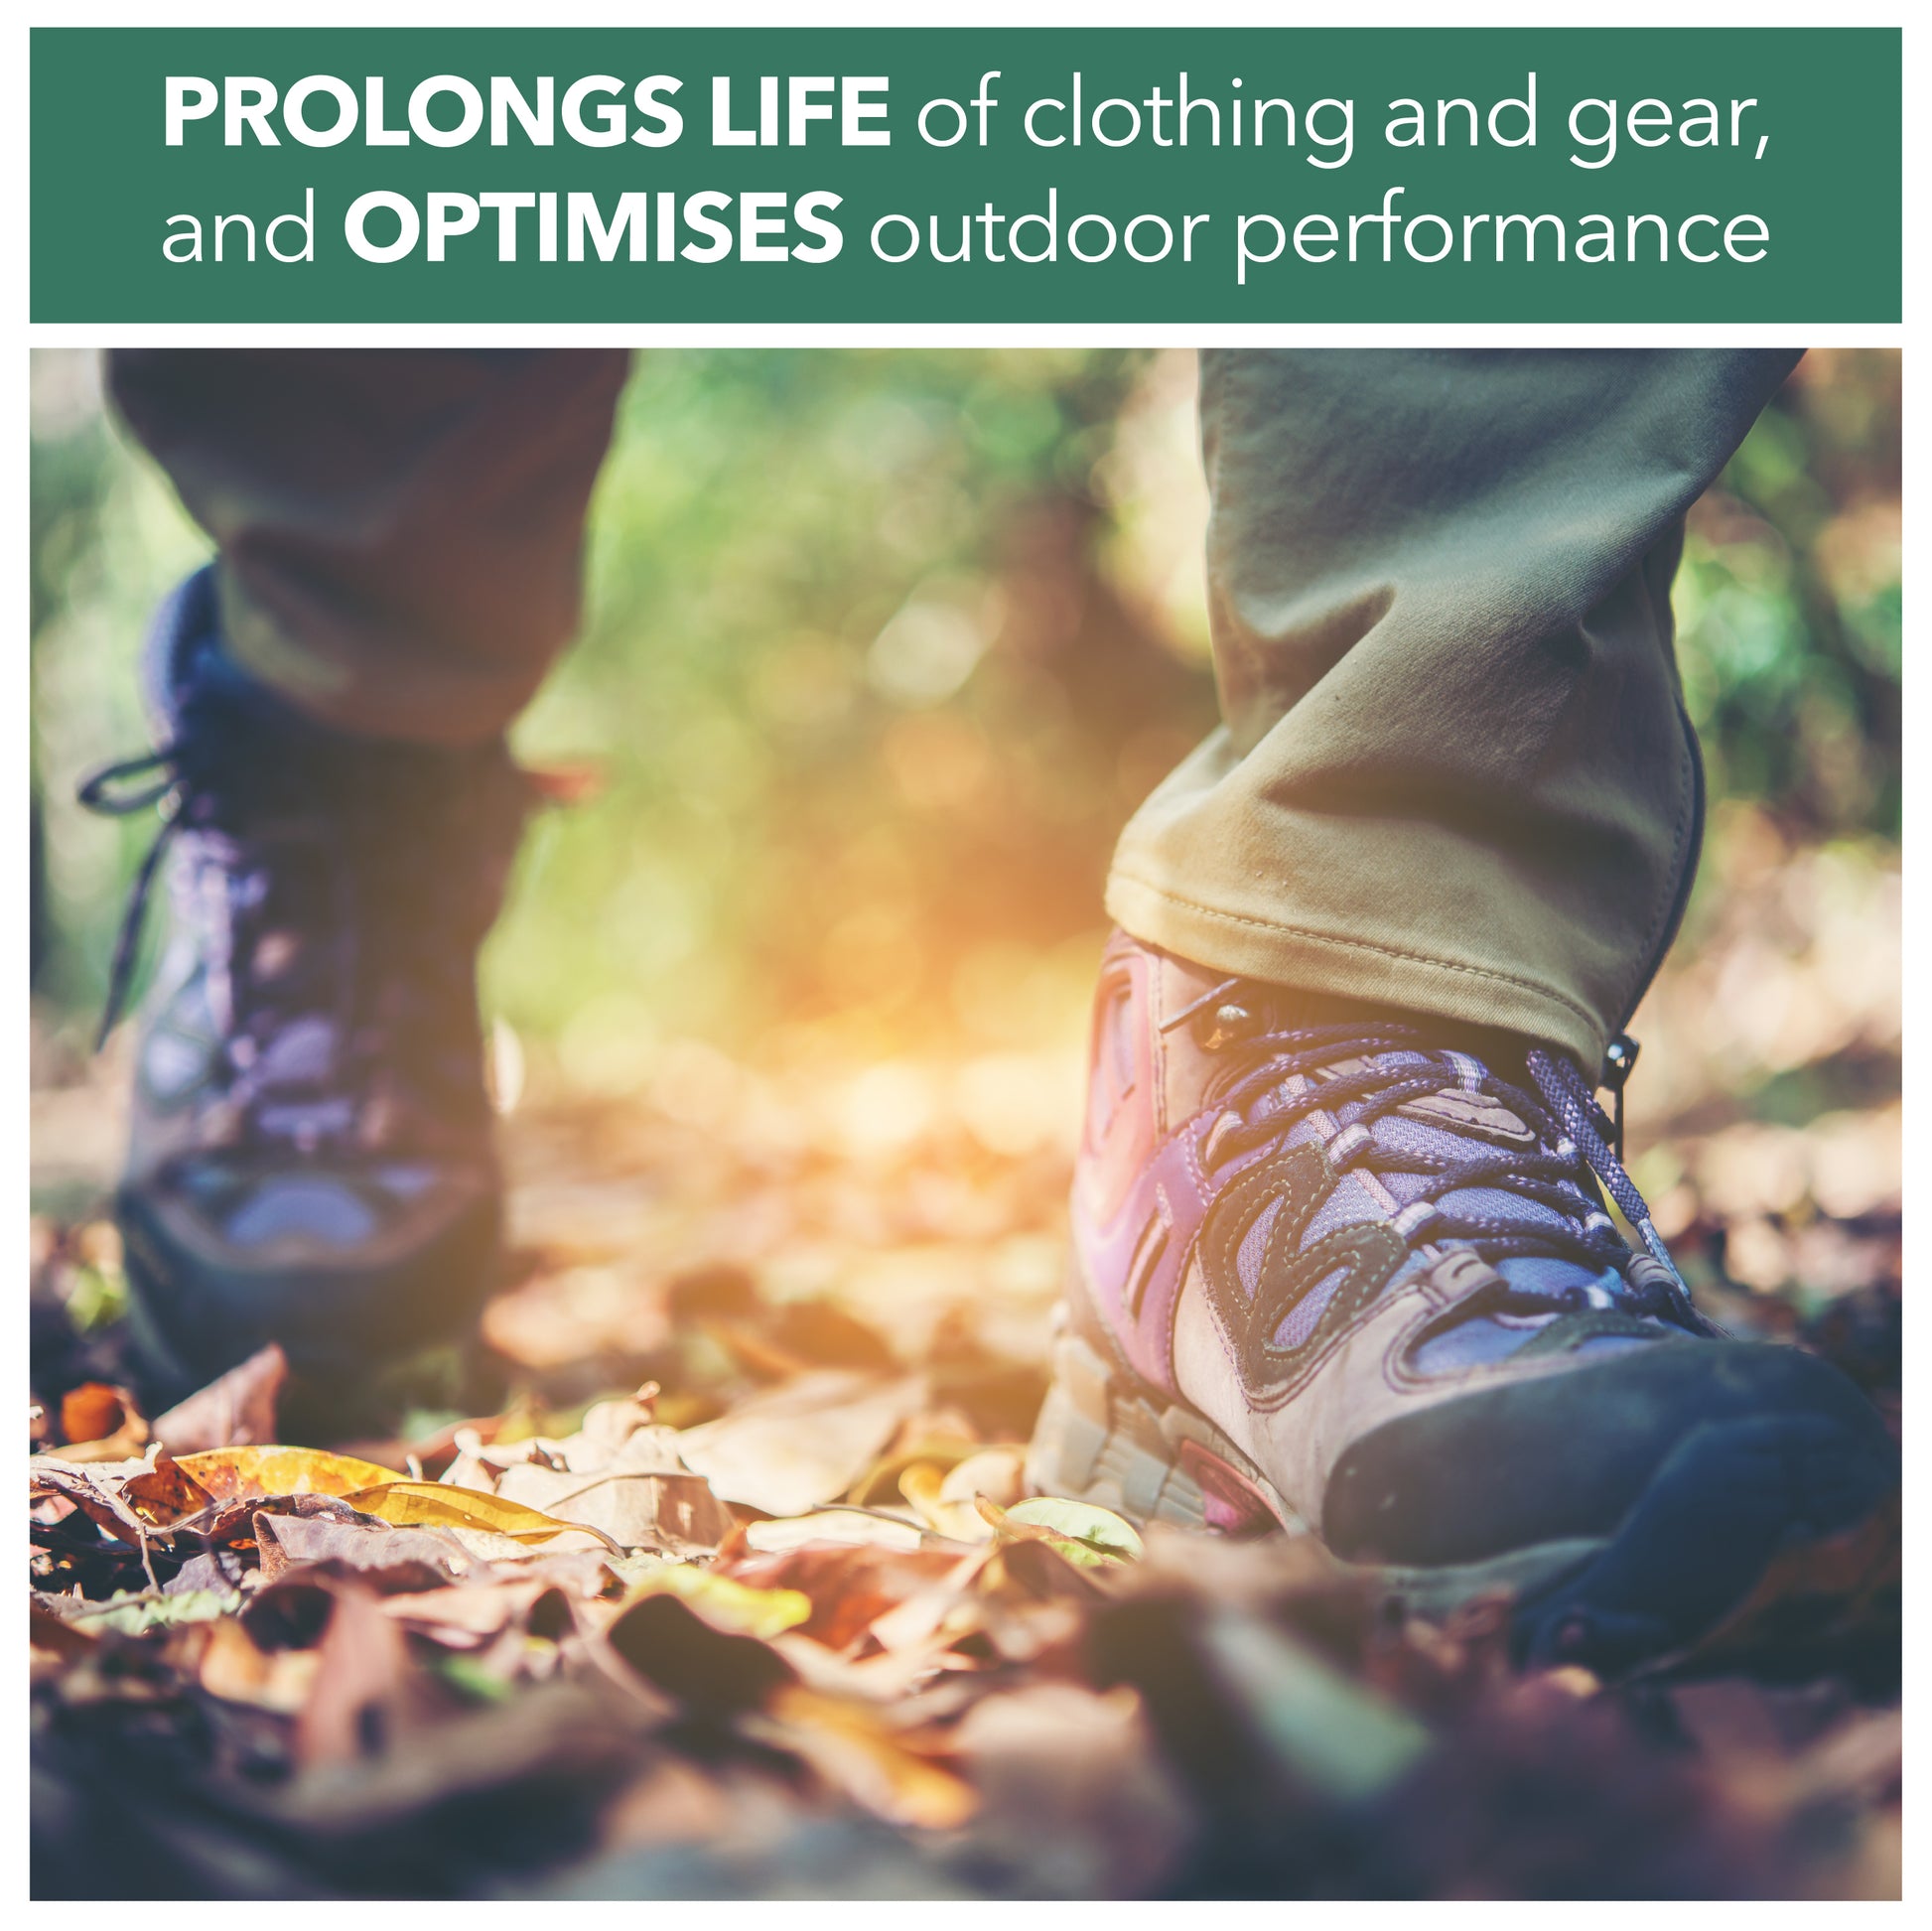 prolongs life of clothing and gear, and optimises outdoor performance